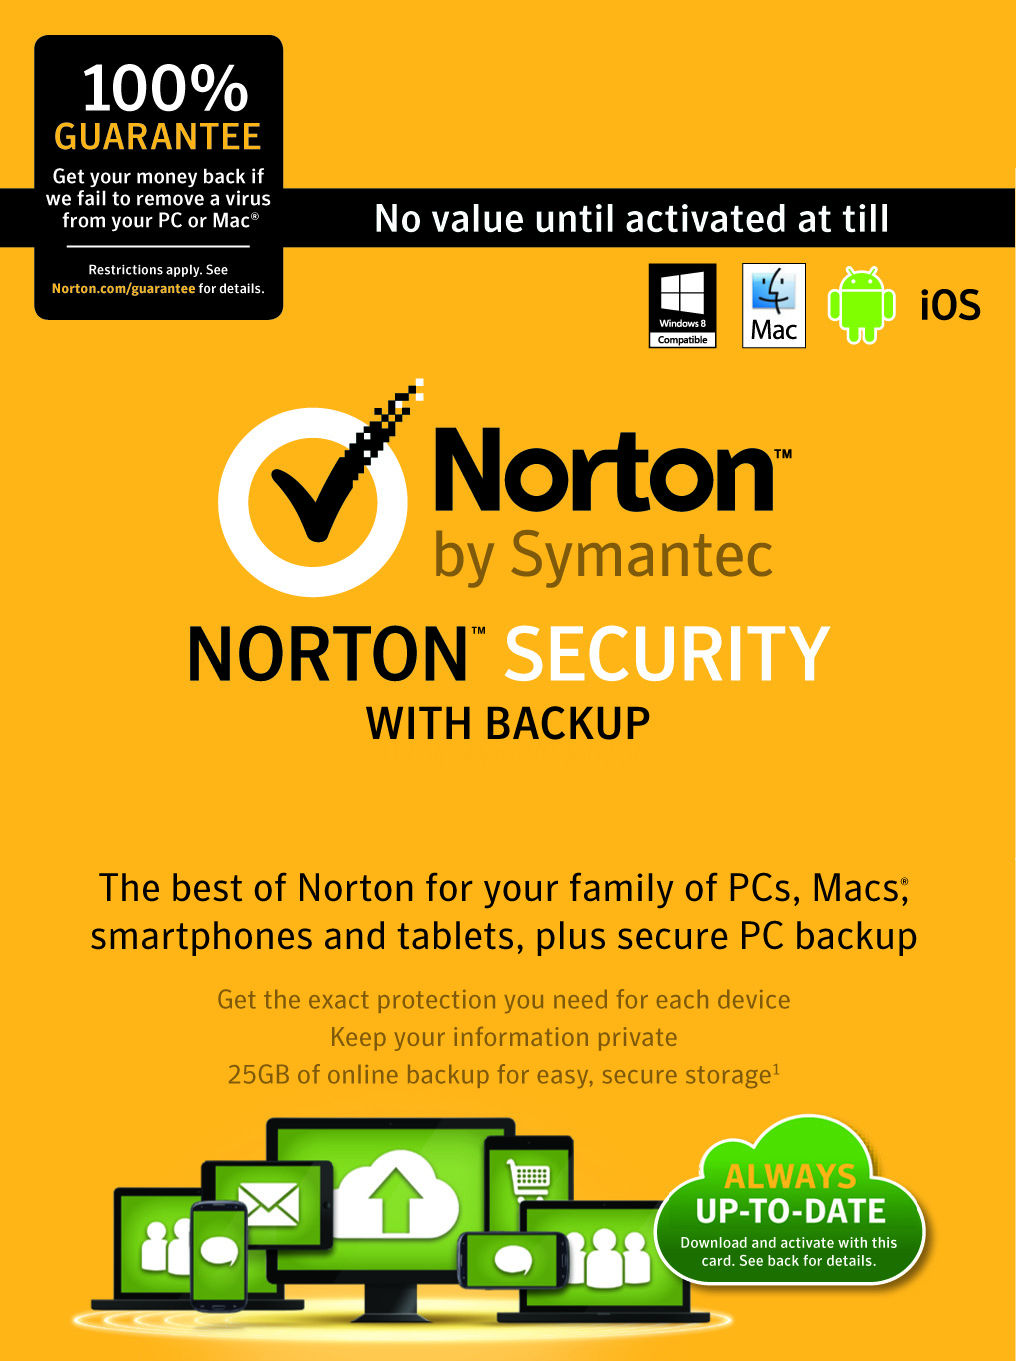 norton internet security 2016 free 90 day trial